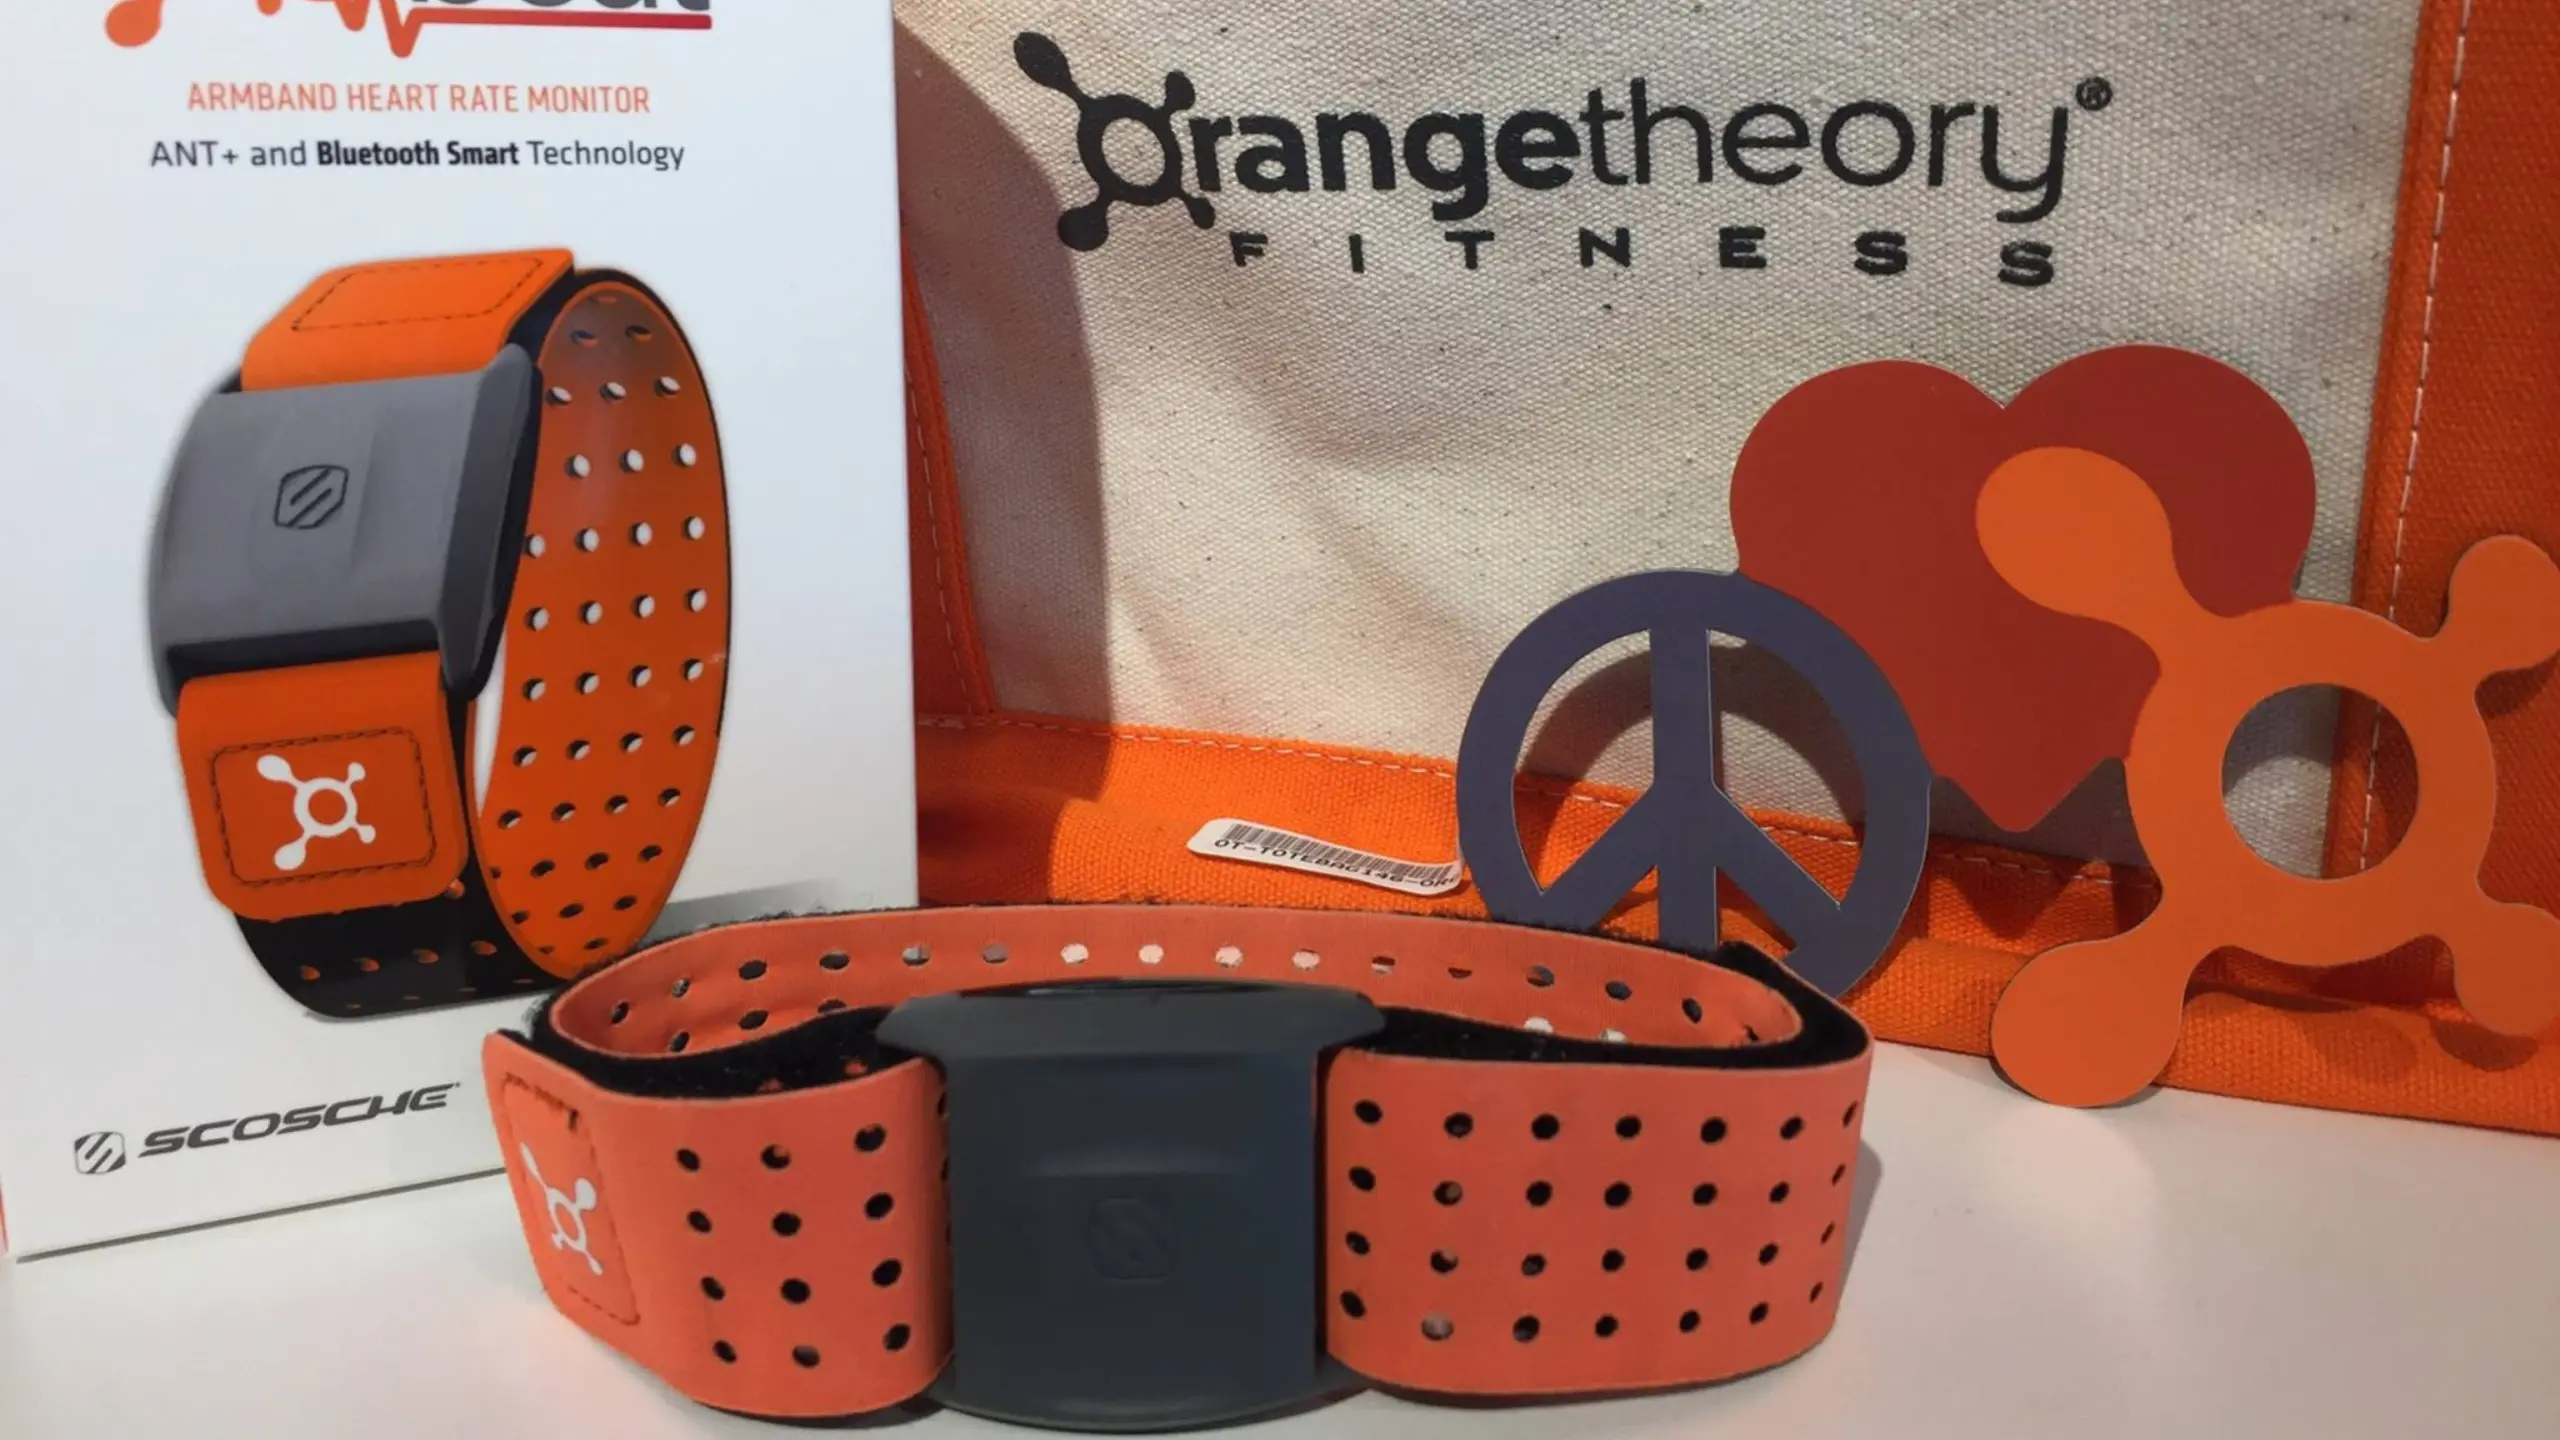 What Is The Orangetheory Heart Rate Monitor